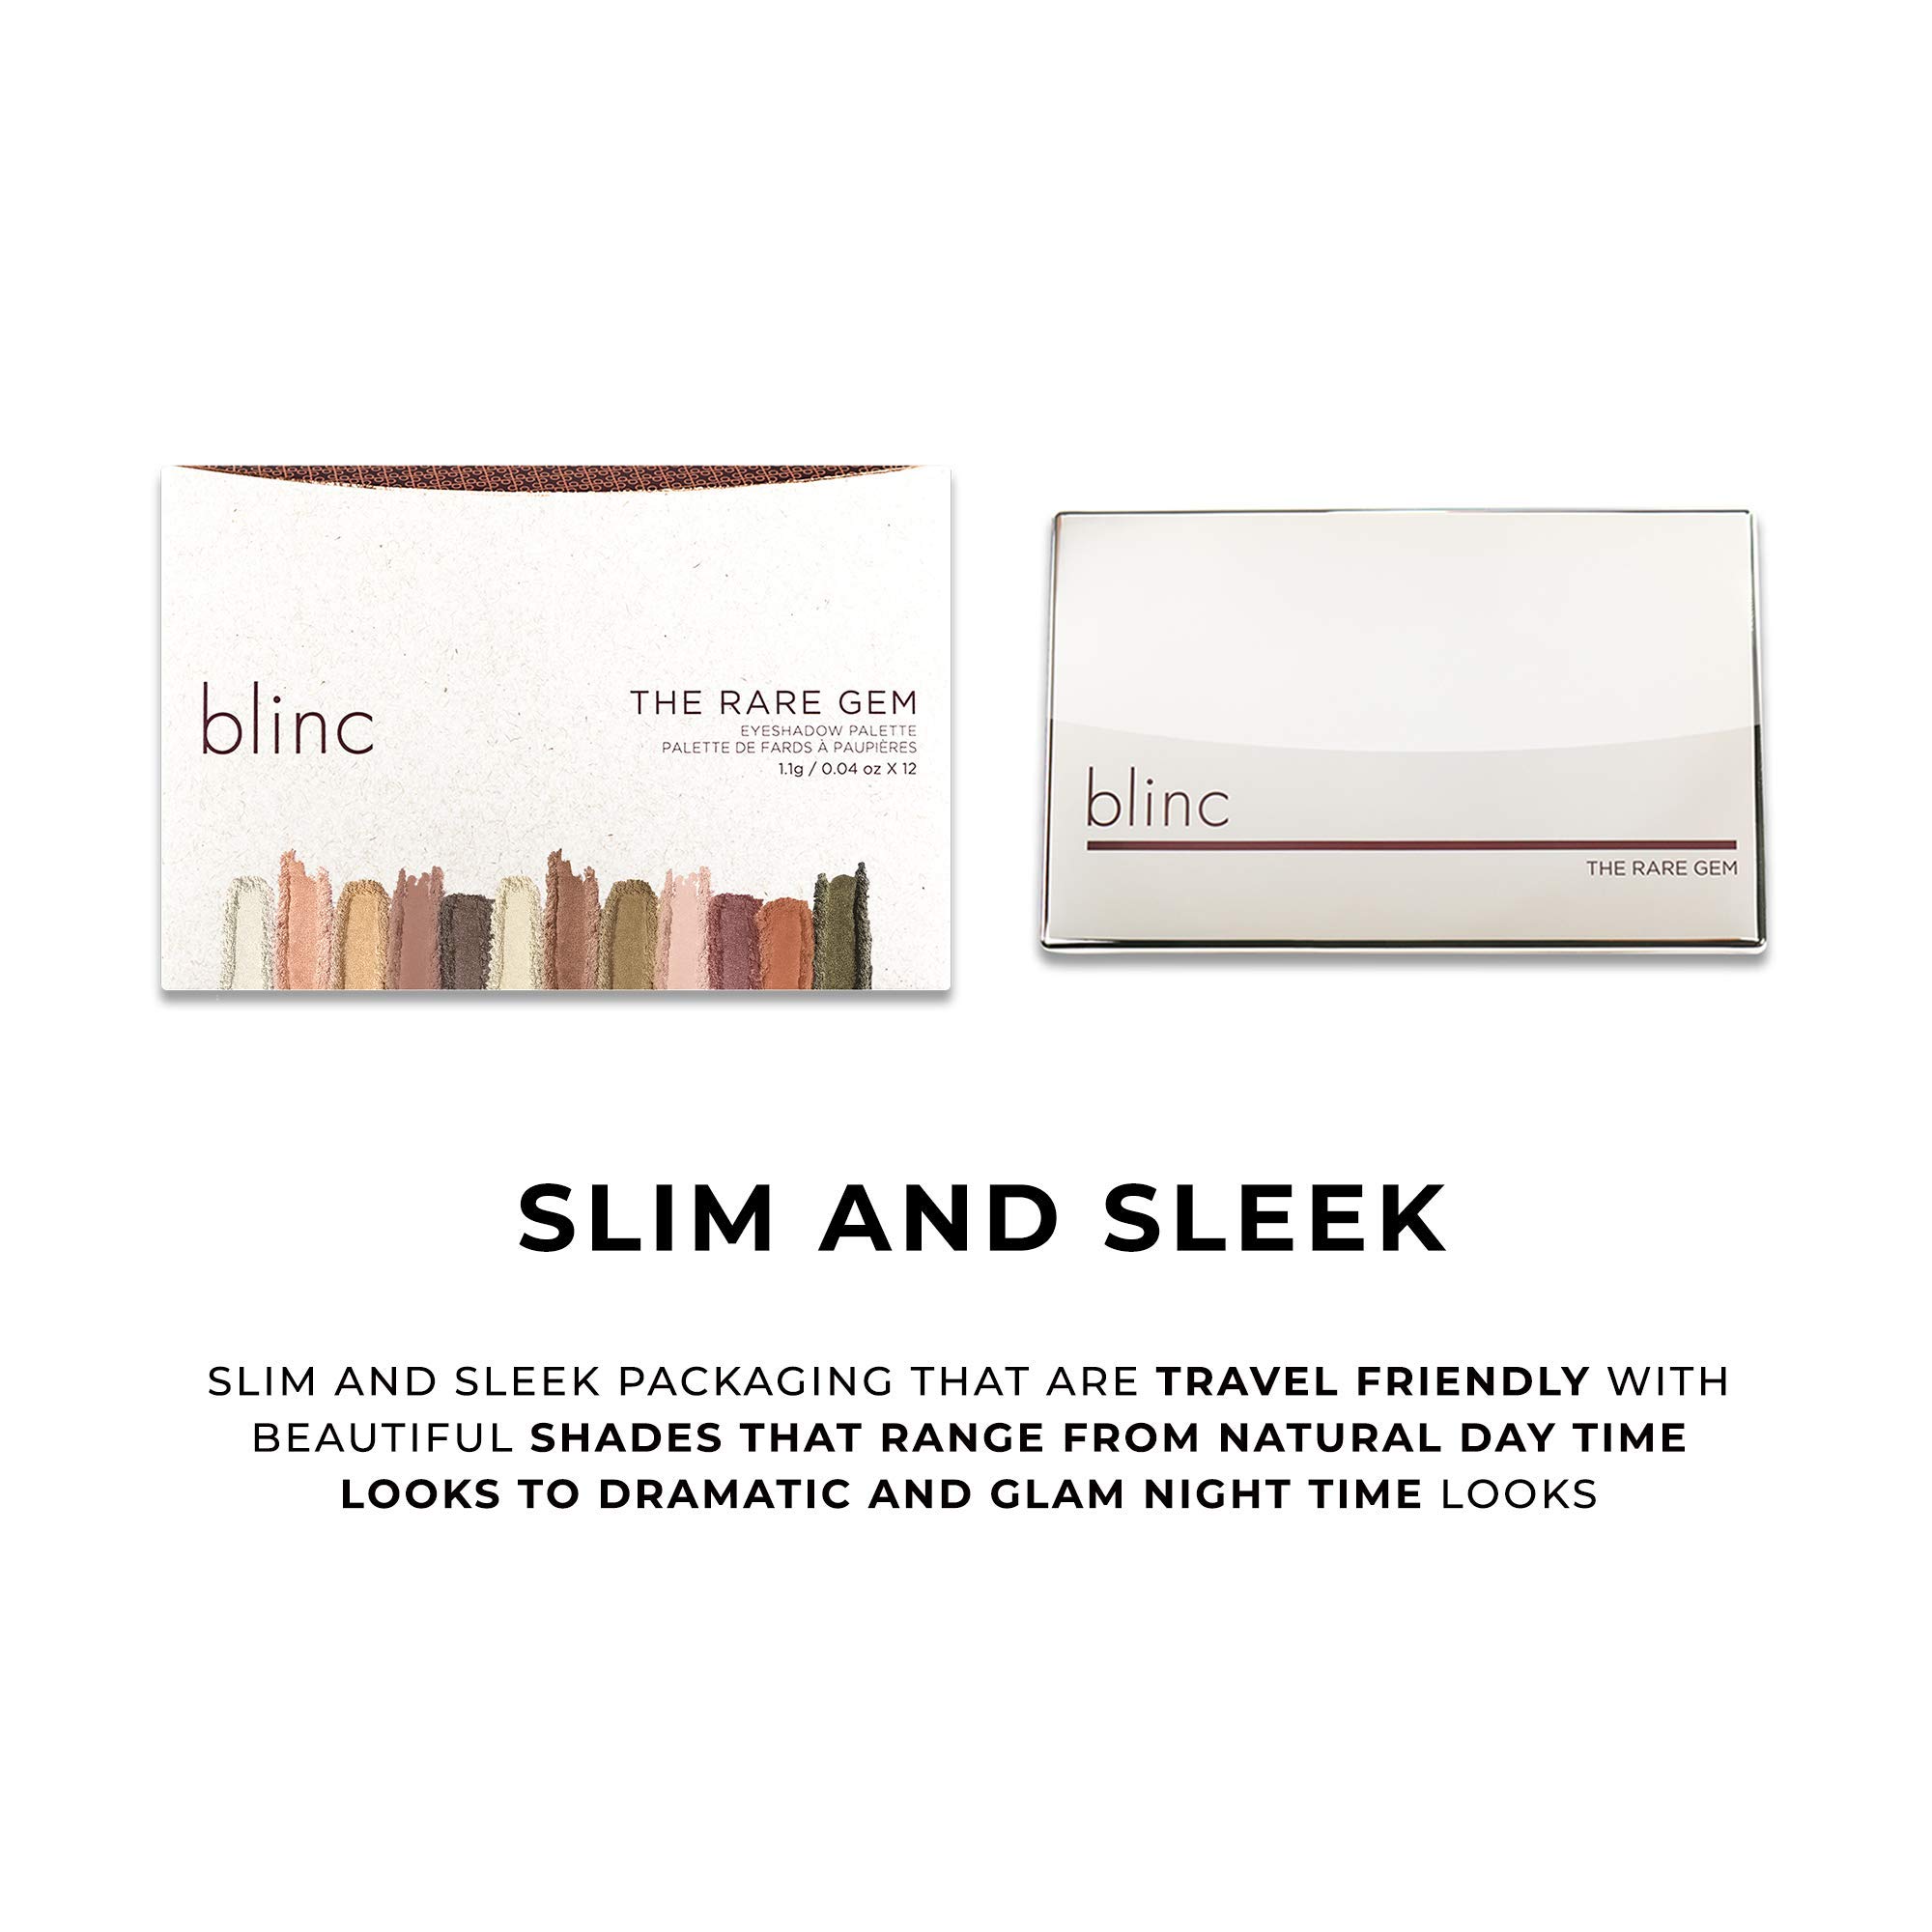 blinc Rare Gem Eyeshadow Palette, Long-Lasting, Creamy, Blendable and Pigmented Matte, Shimmer and Metallic Eyeshadows, Gluten-Free and Cruelty-Free, 1.1g / 0.04 Oz x 12